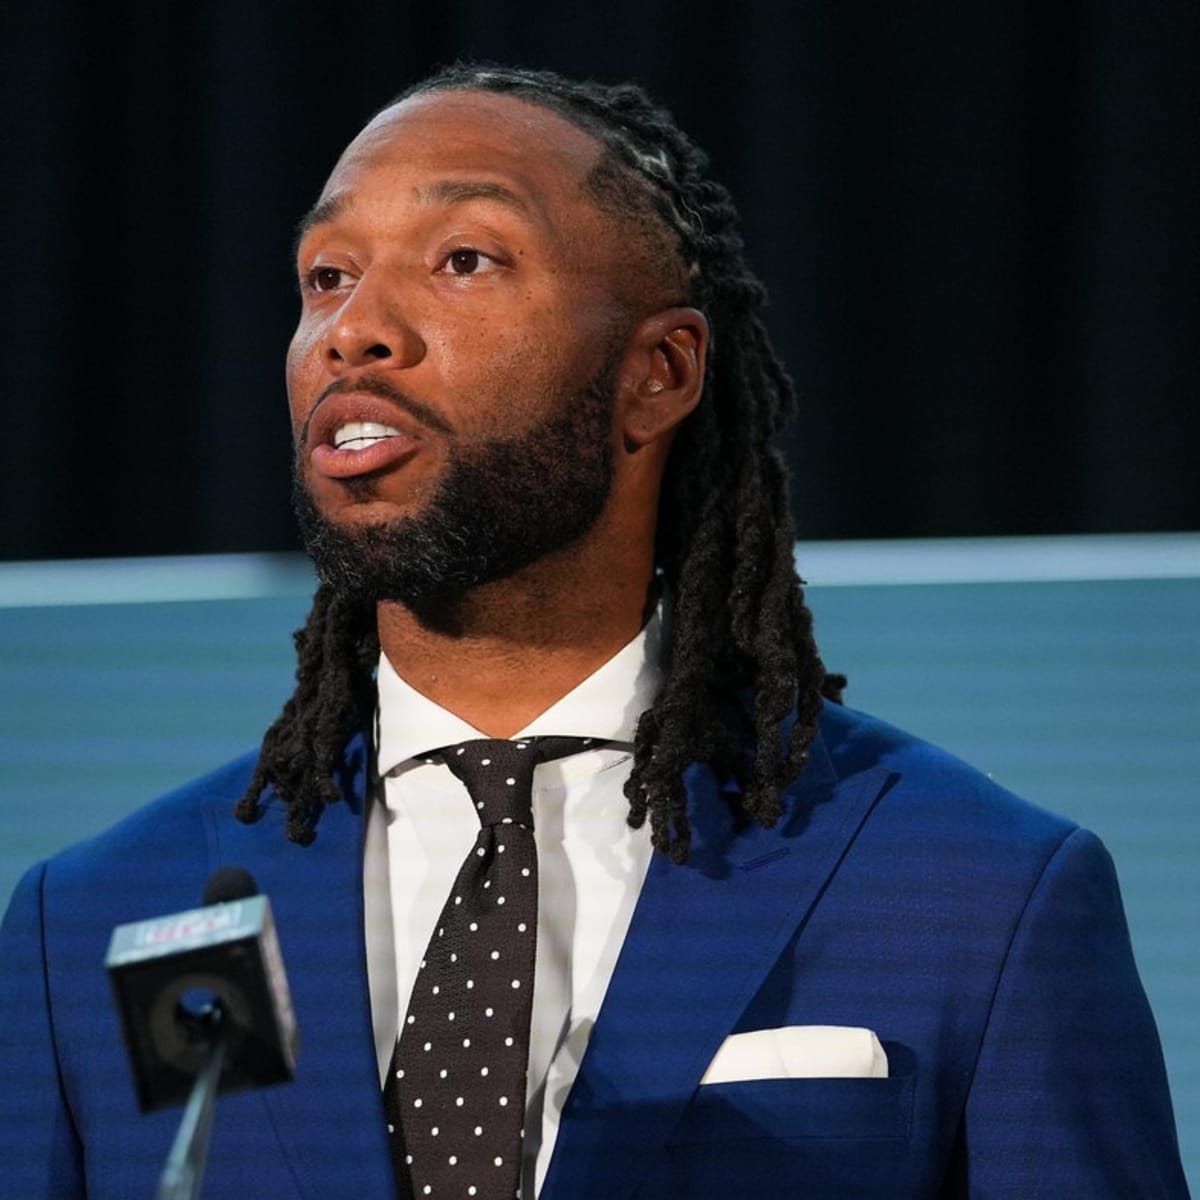 Larry Fitzgerald's Net Worth - How Rich is He?